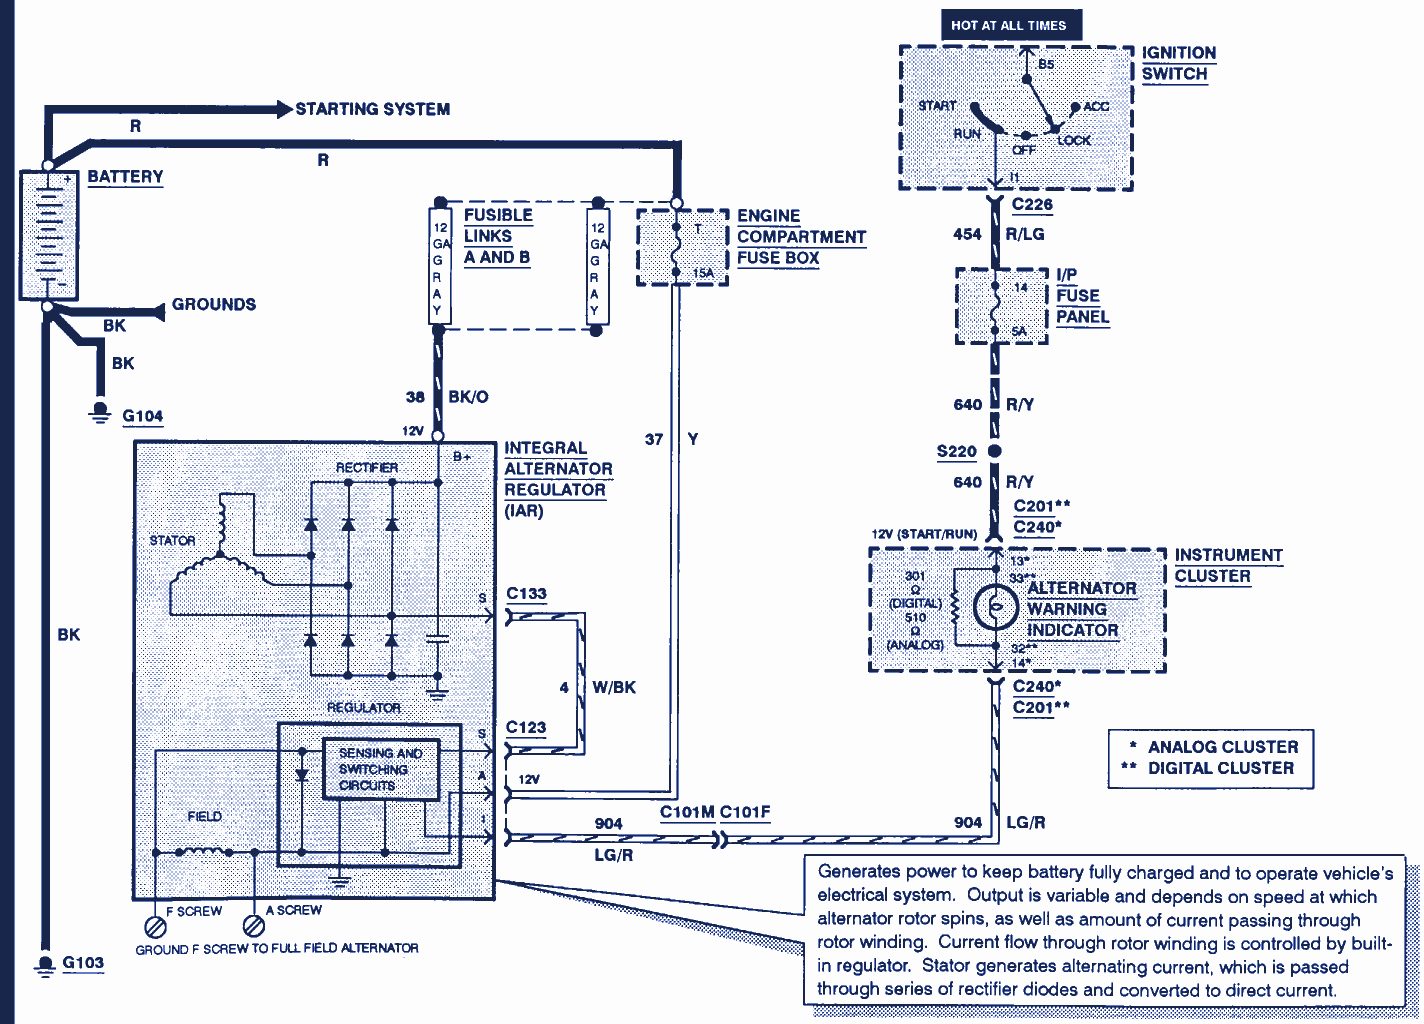 2002 Ford Expedition Wiring Diagram from 3.bp.blogspot.com